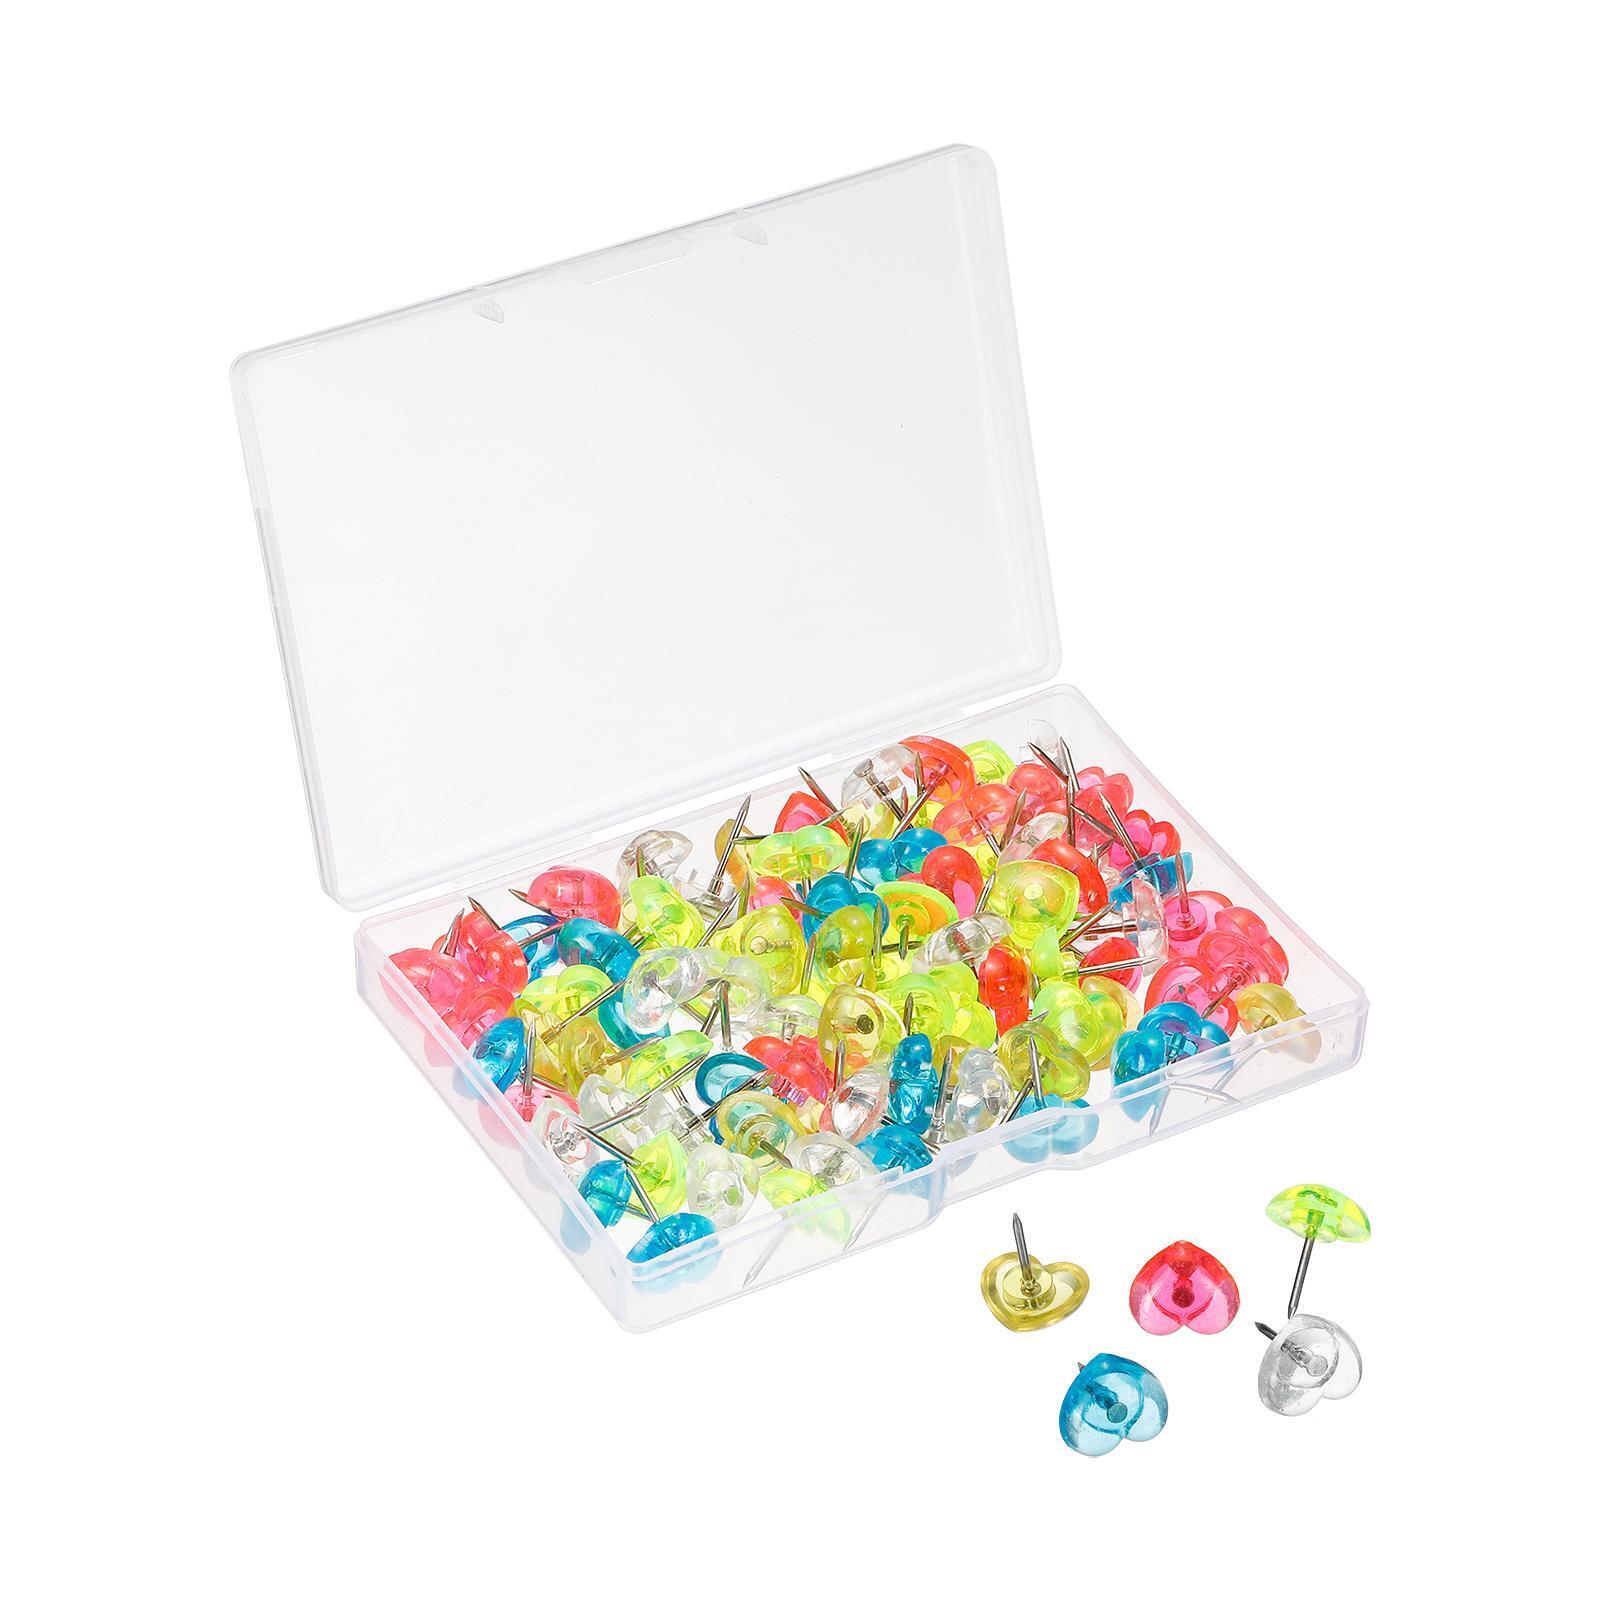 100pcs Push Pins, Heart Shaped Thumb Tacks Steel Point For Office, Multicolor